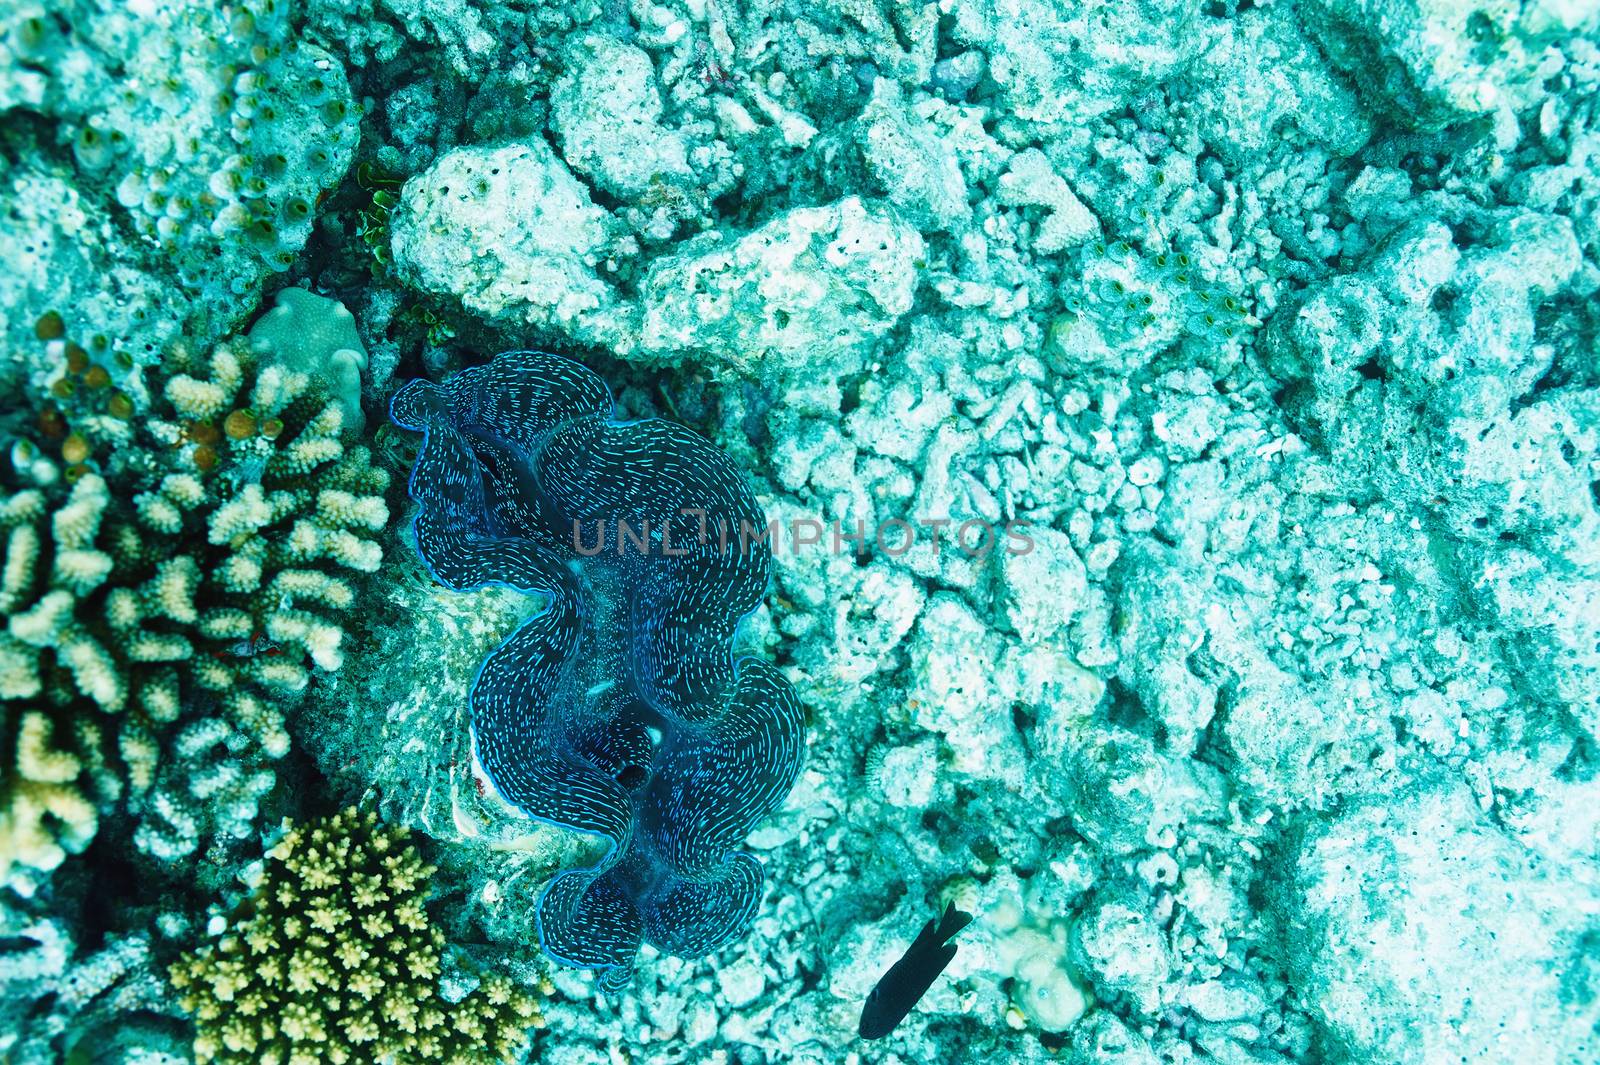 Giant clam (Tridacna gigas)at the tropical coral reef